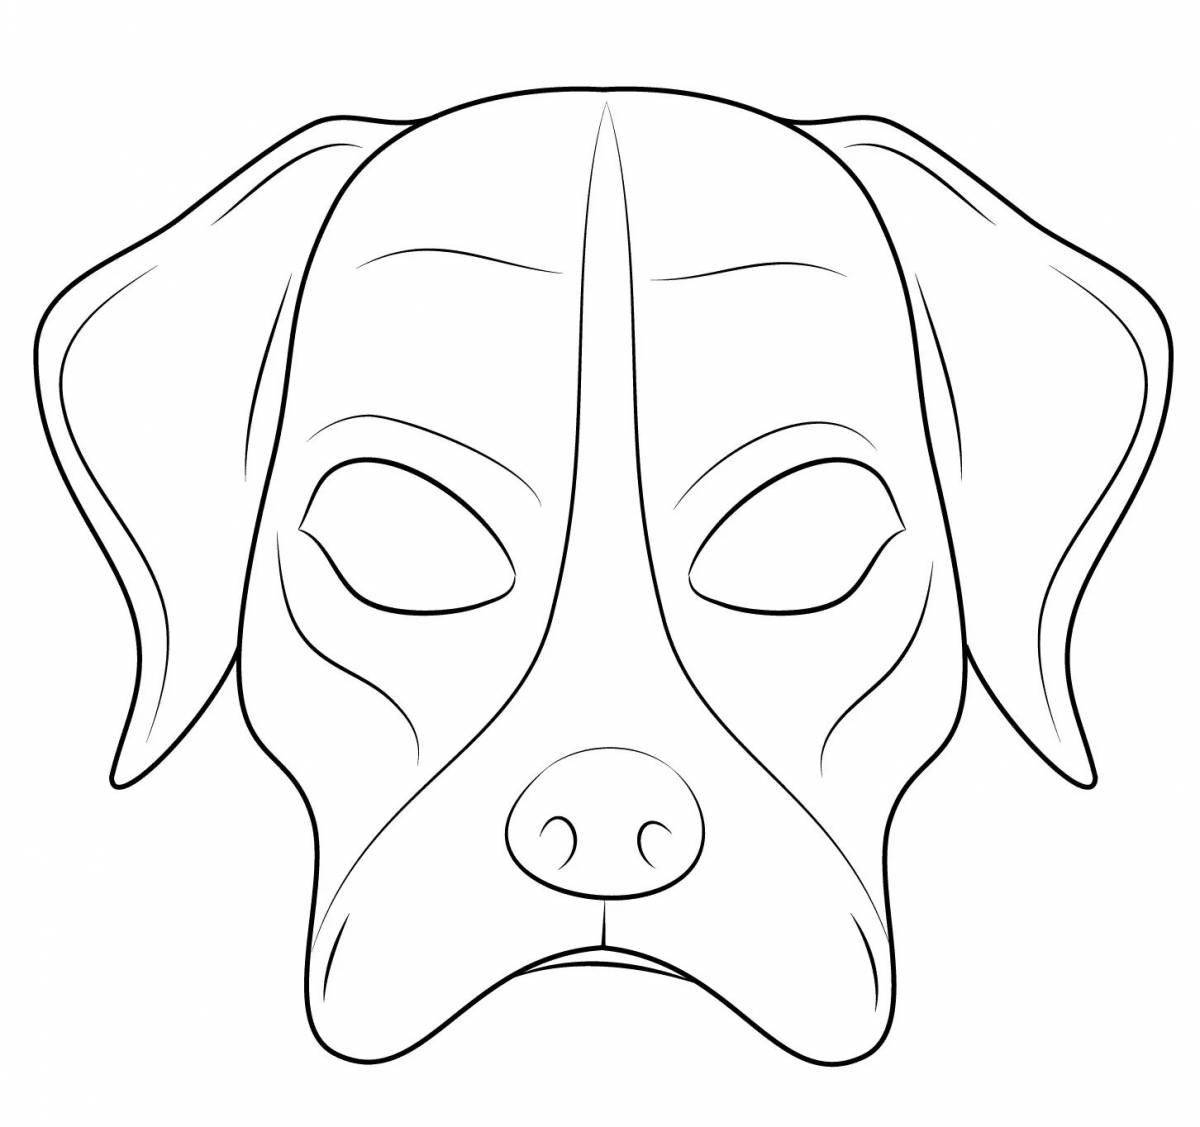 Coloring page exquisite dog muzzle